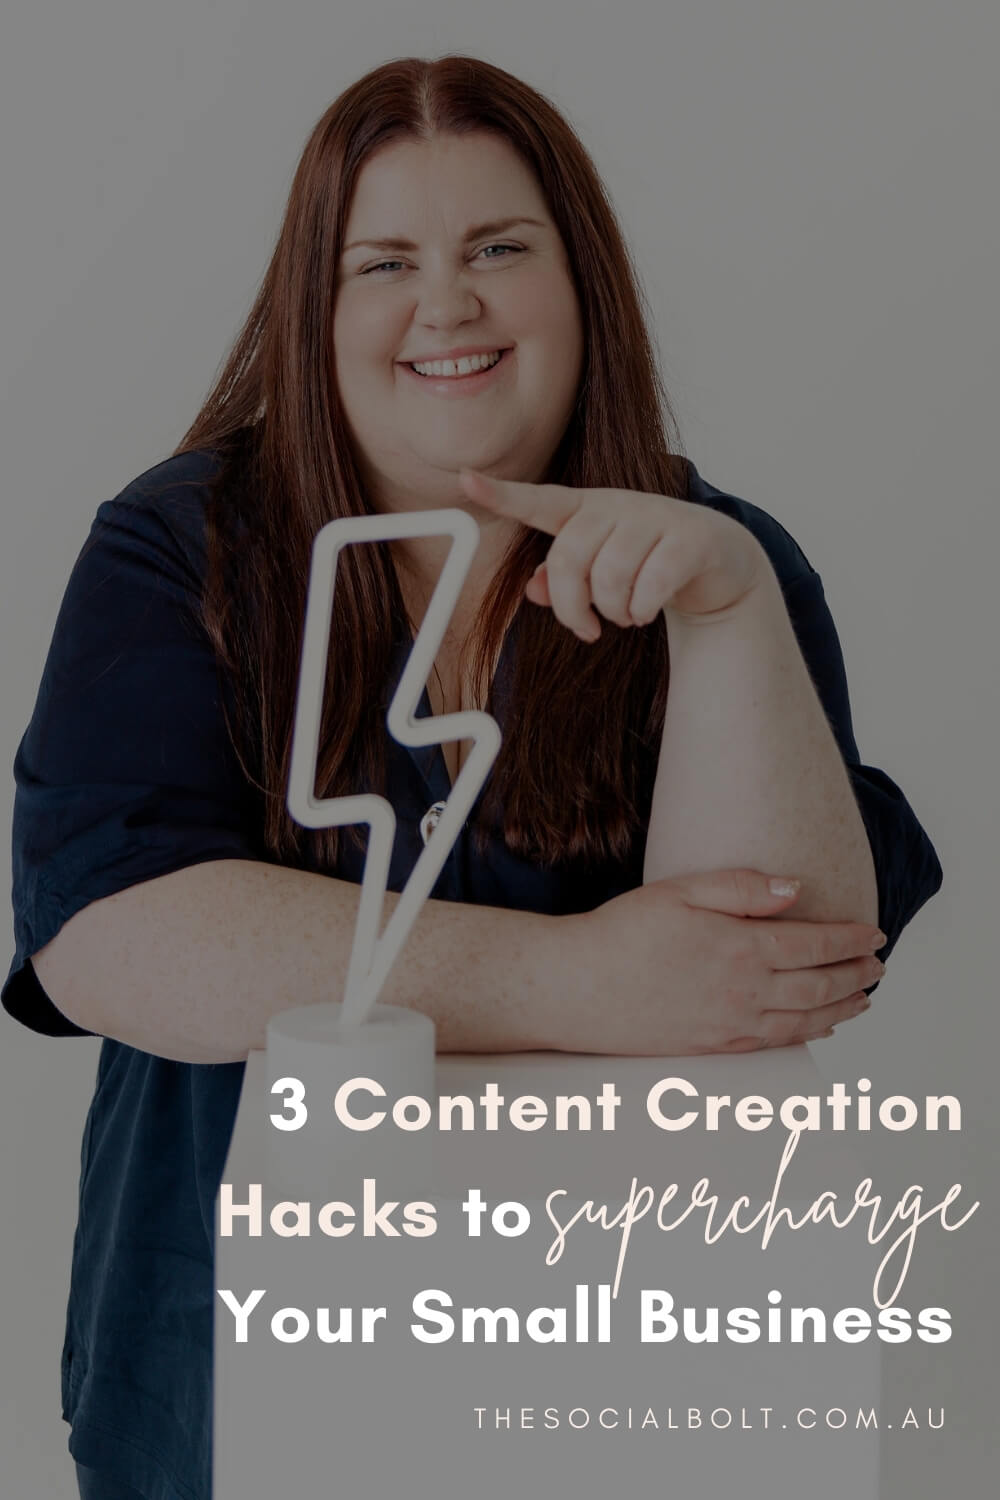 3 Content Creation Hacks to Supercharge Your Small Business